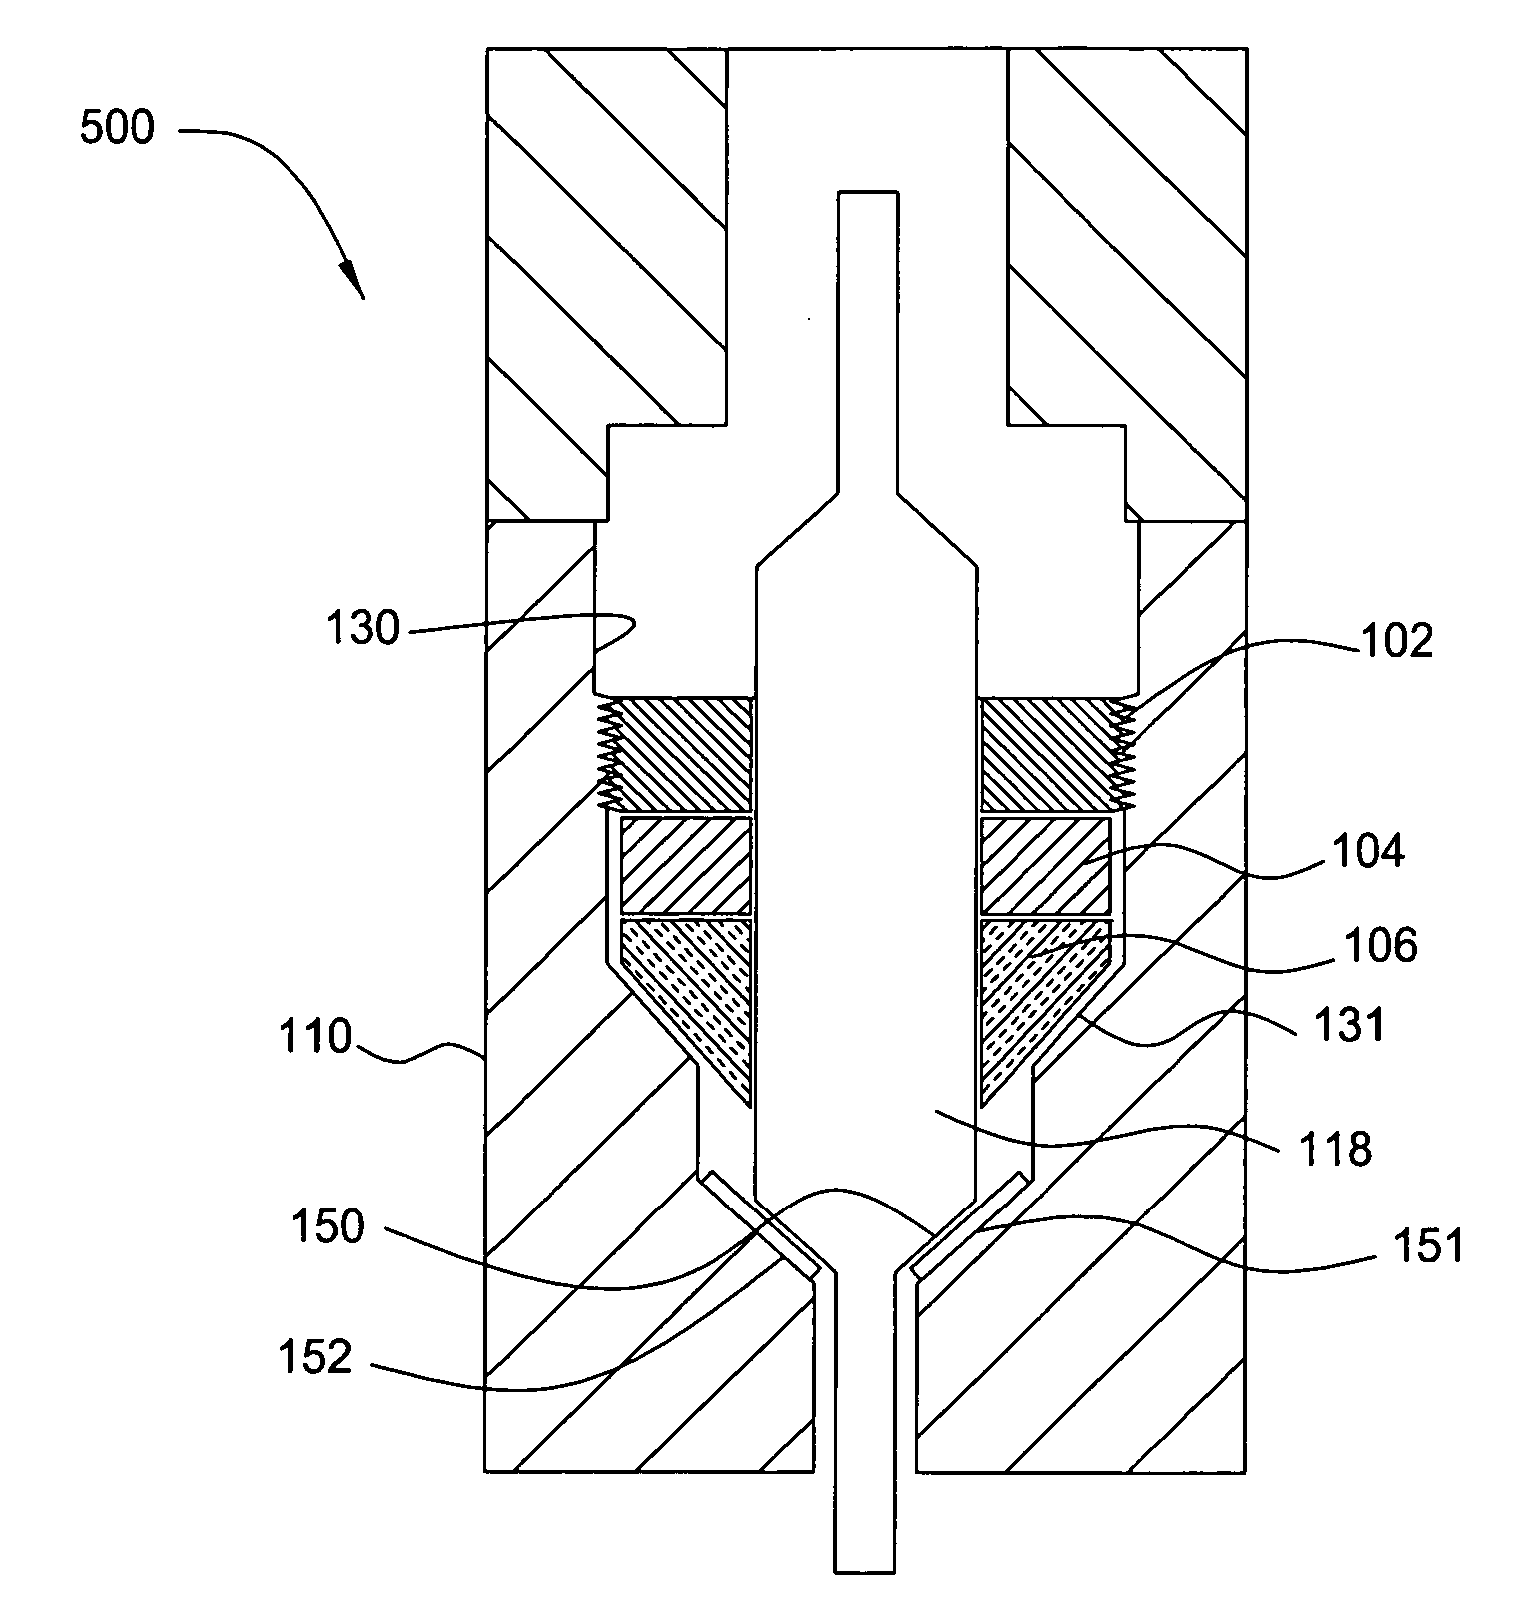 Optical waveguide feedthrough assembly